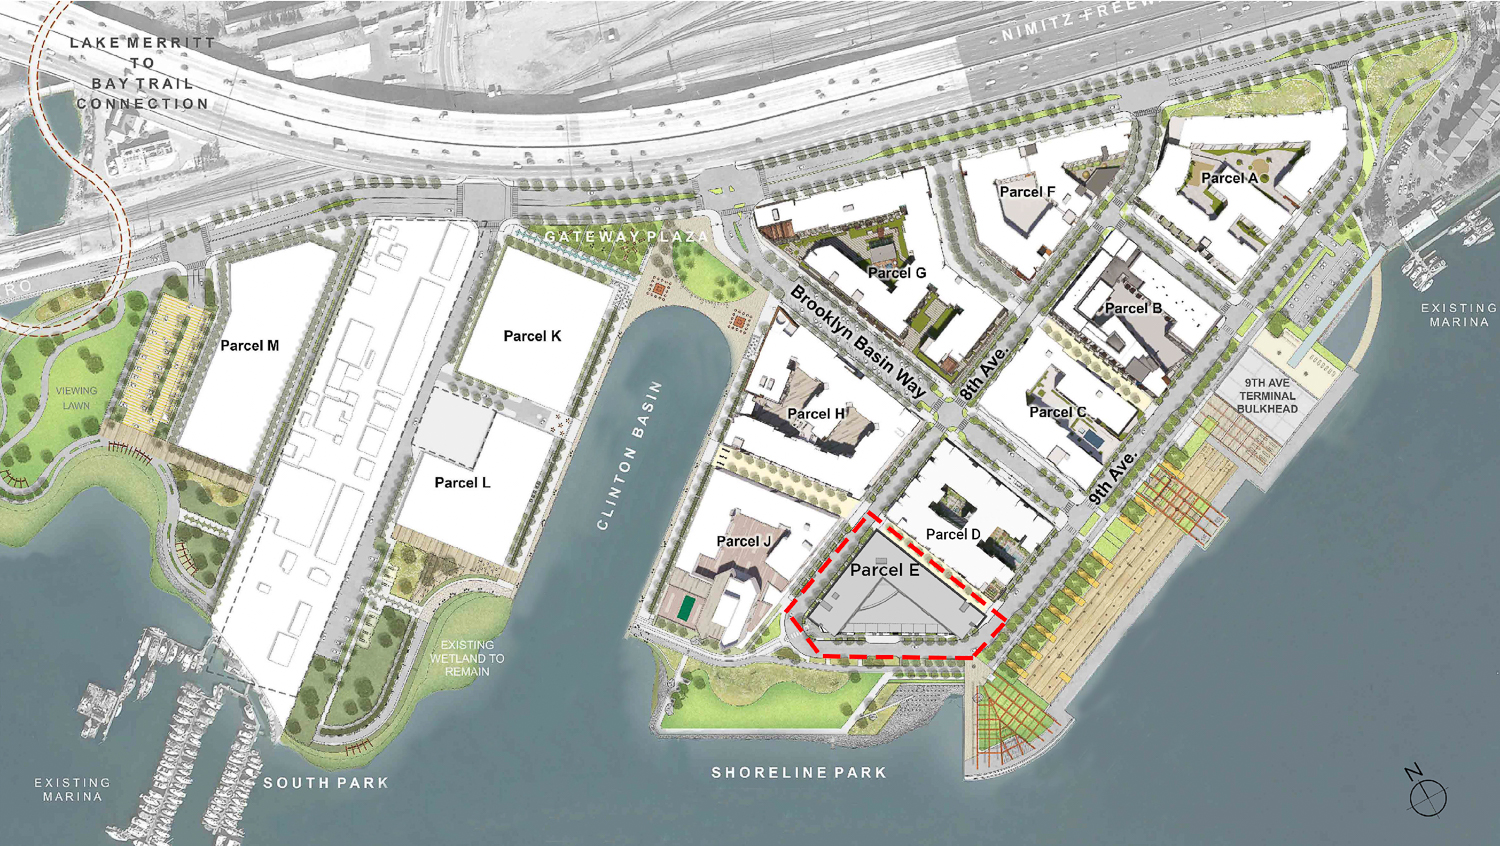 Brooklyn Basin Parcel E outlined within the masterplan site map, rendering by Urbal Architecture